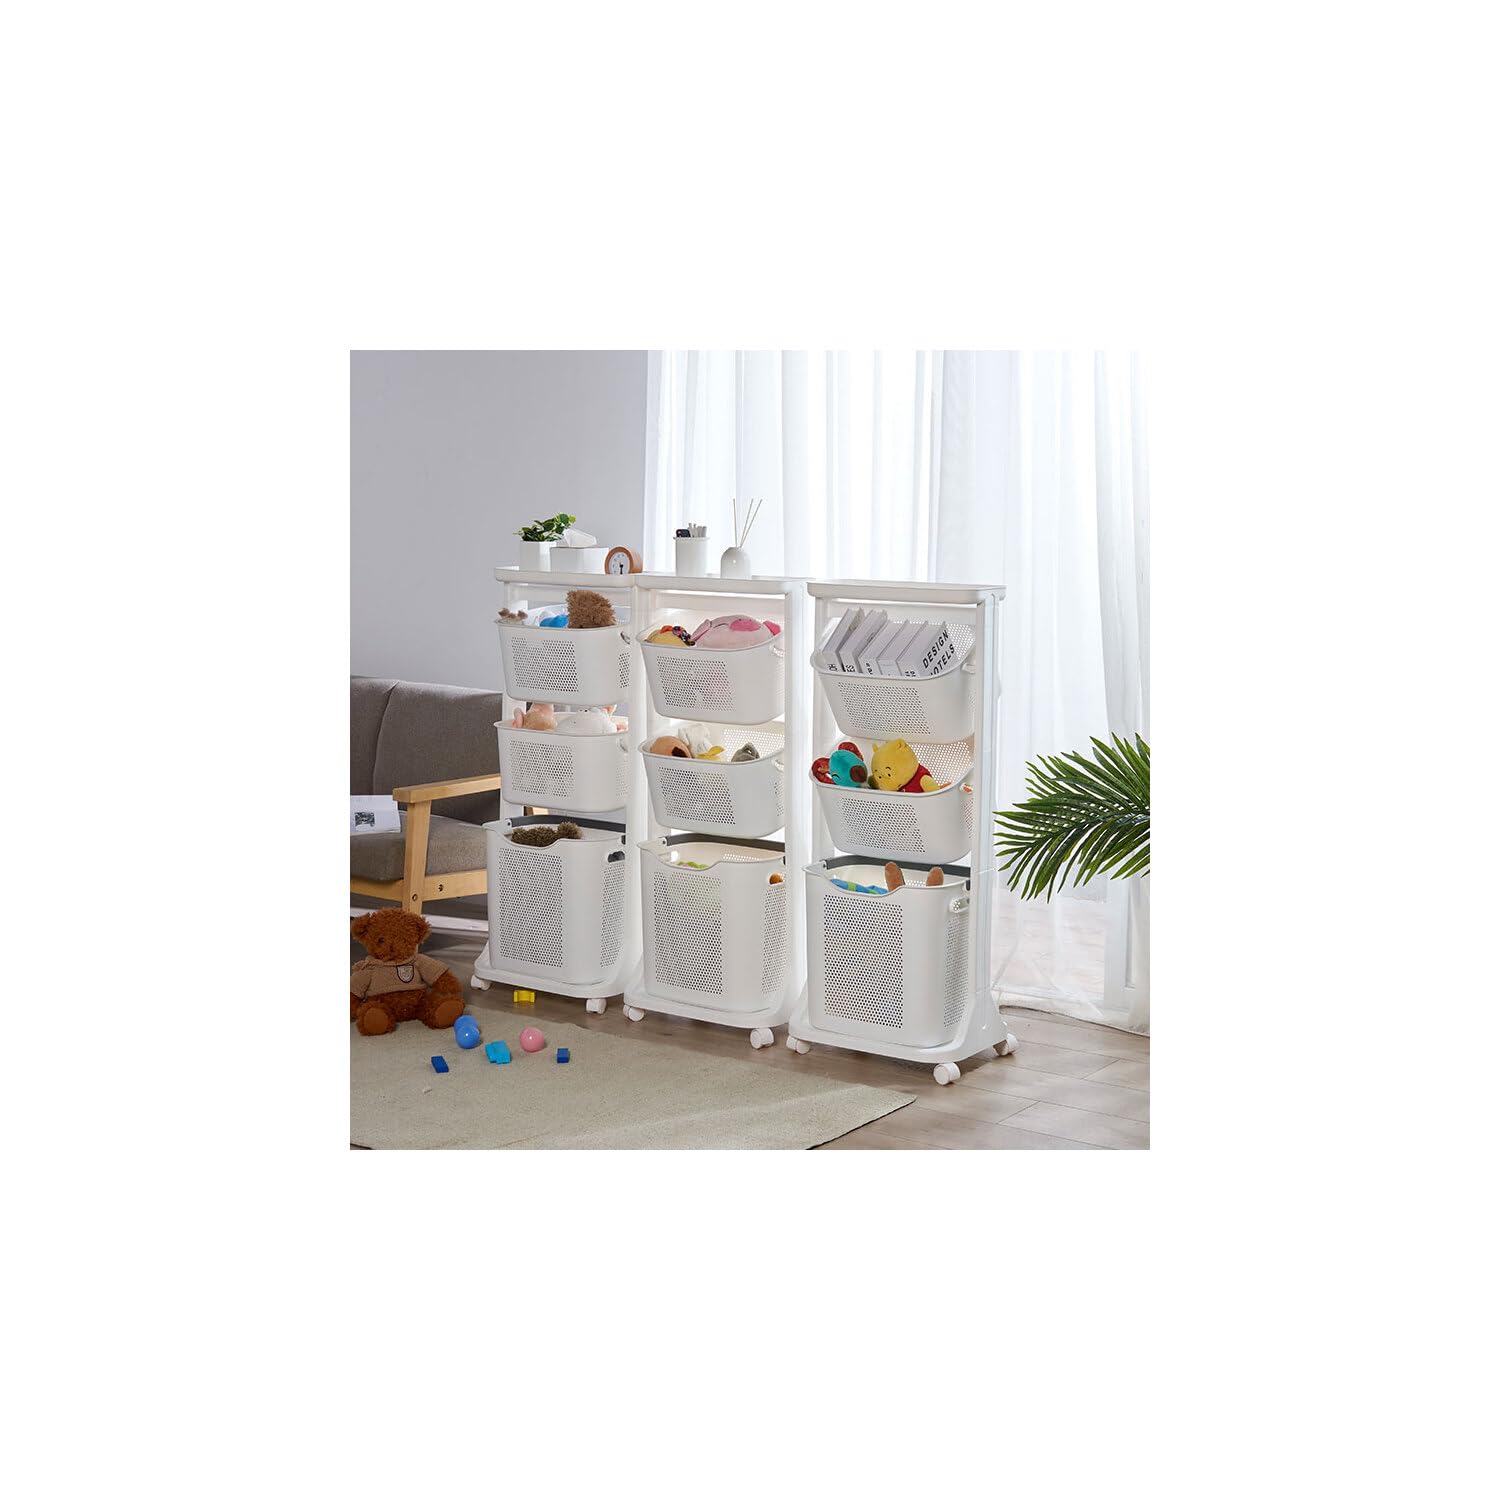 3-Portable Basket Rolling Cart with Top Shelf | Rolling Laundry Cart | Storage Organizer, White